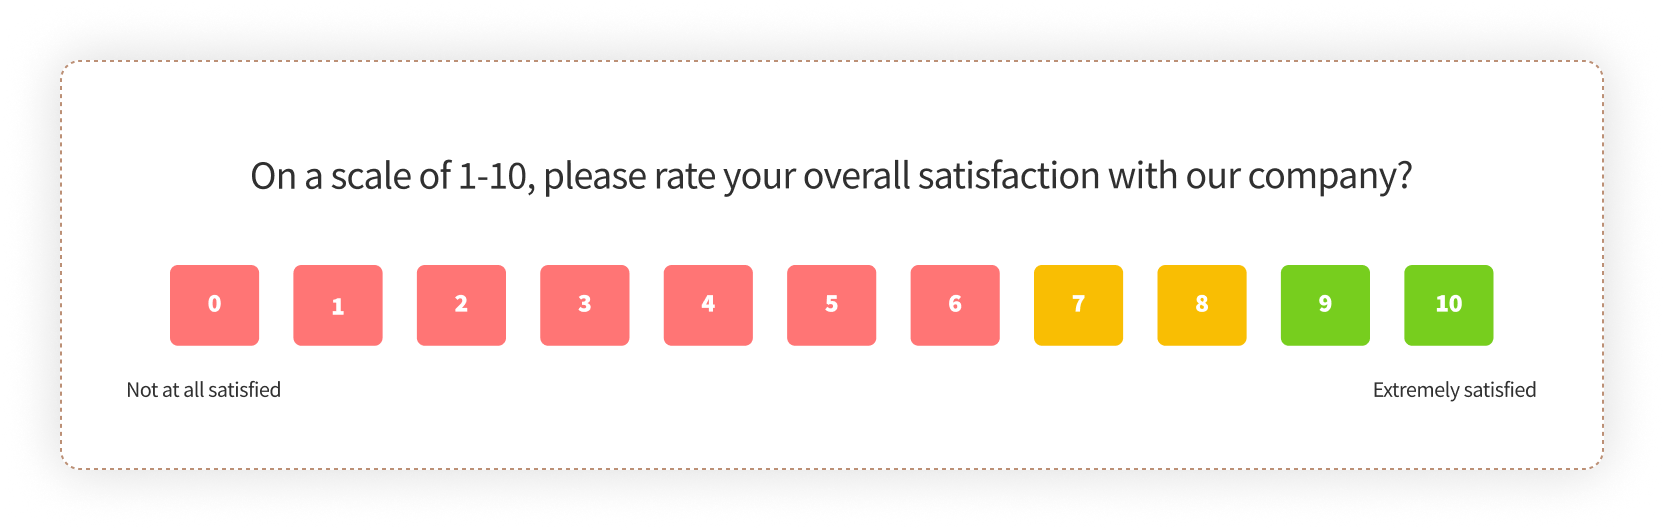 1 to 10 rating scale question for customer satisfaction